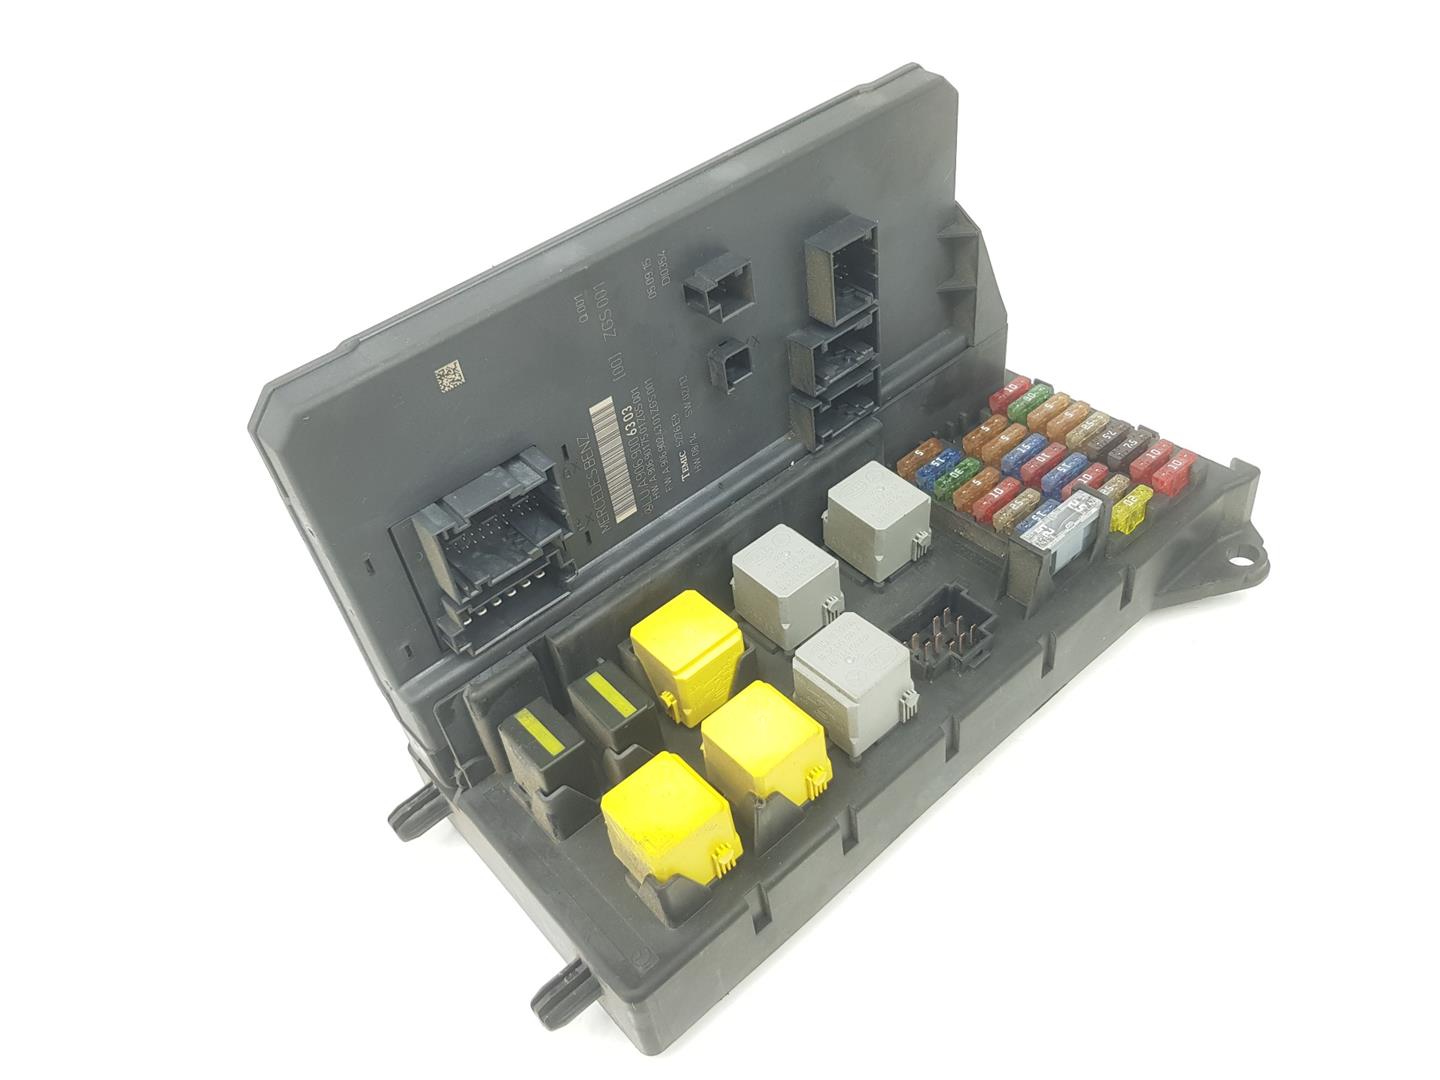 VOLKSWAGEN Crafter 1 generation (2006-2016) Fuse Box A9069006303, 2E0937615B 24252686